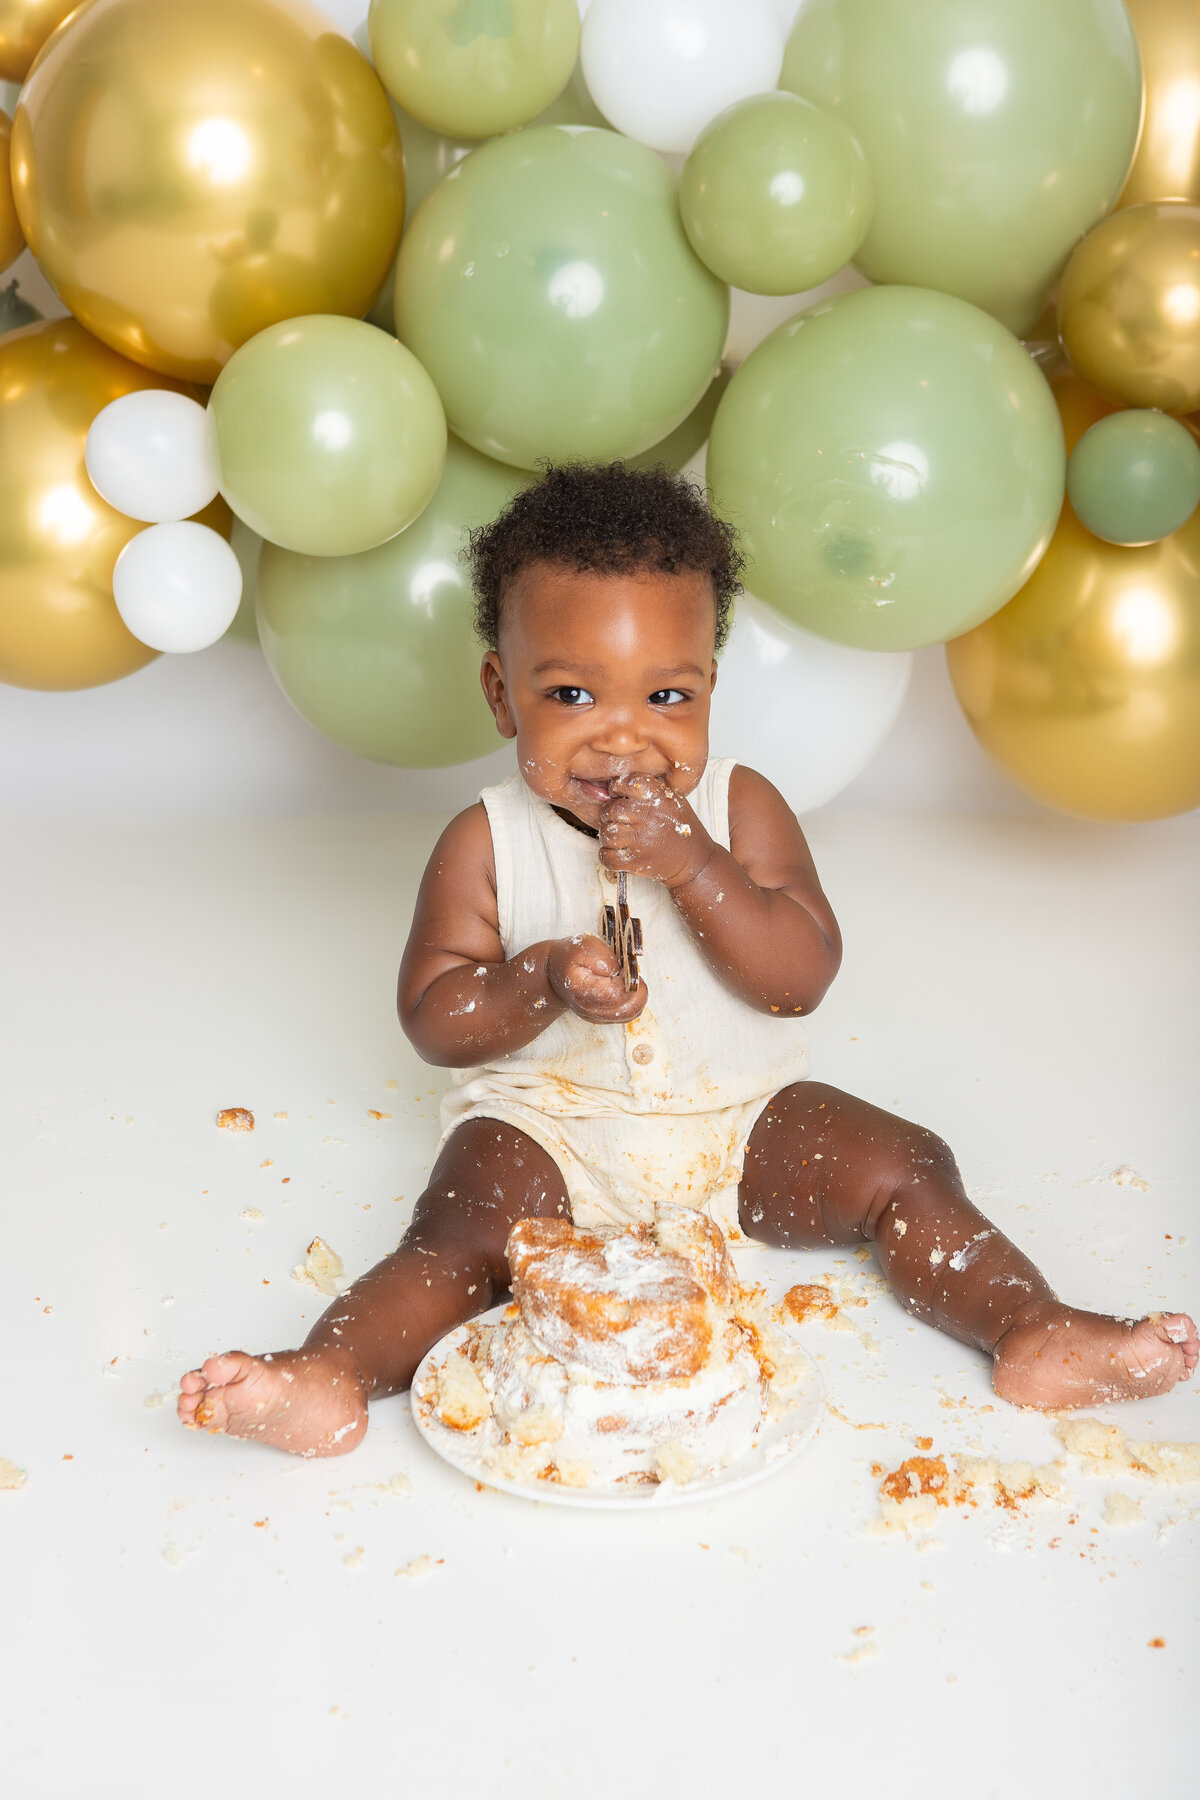 Baby eating a simple white cake with an olive and gold balloon backdrop